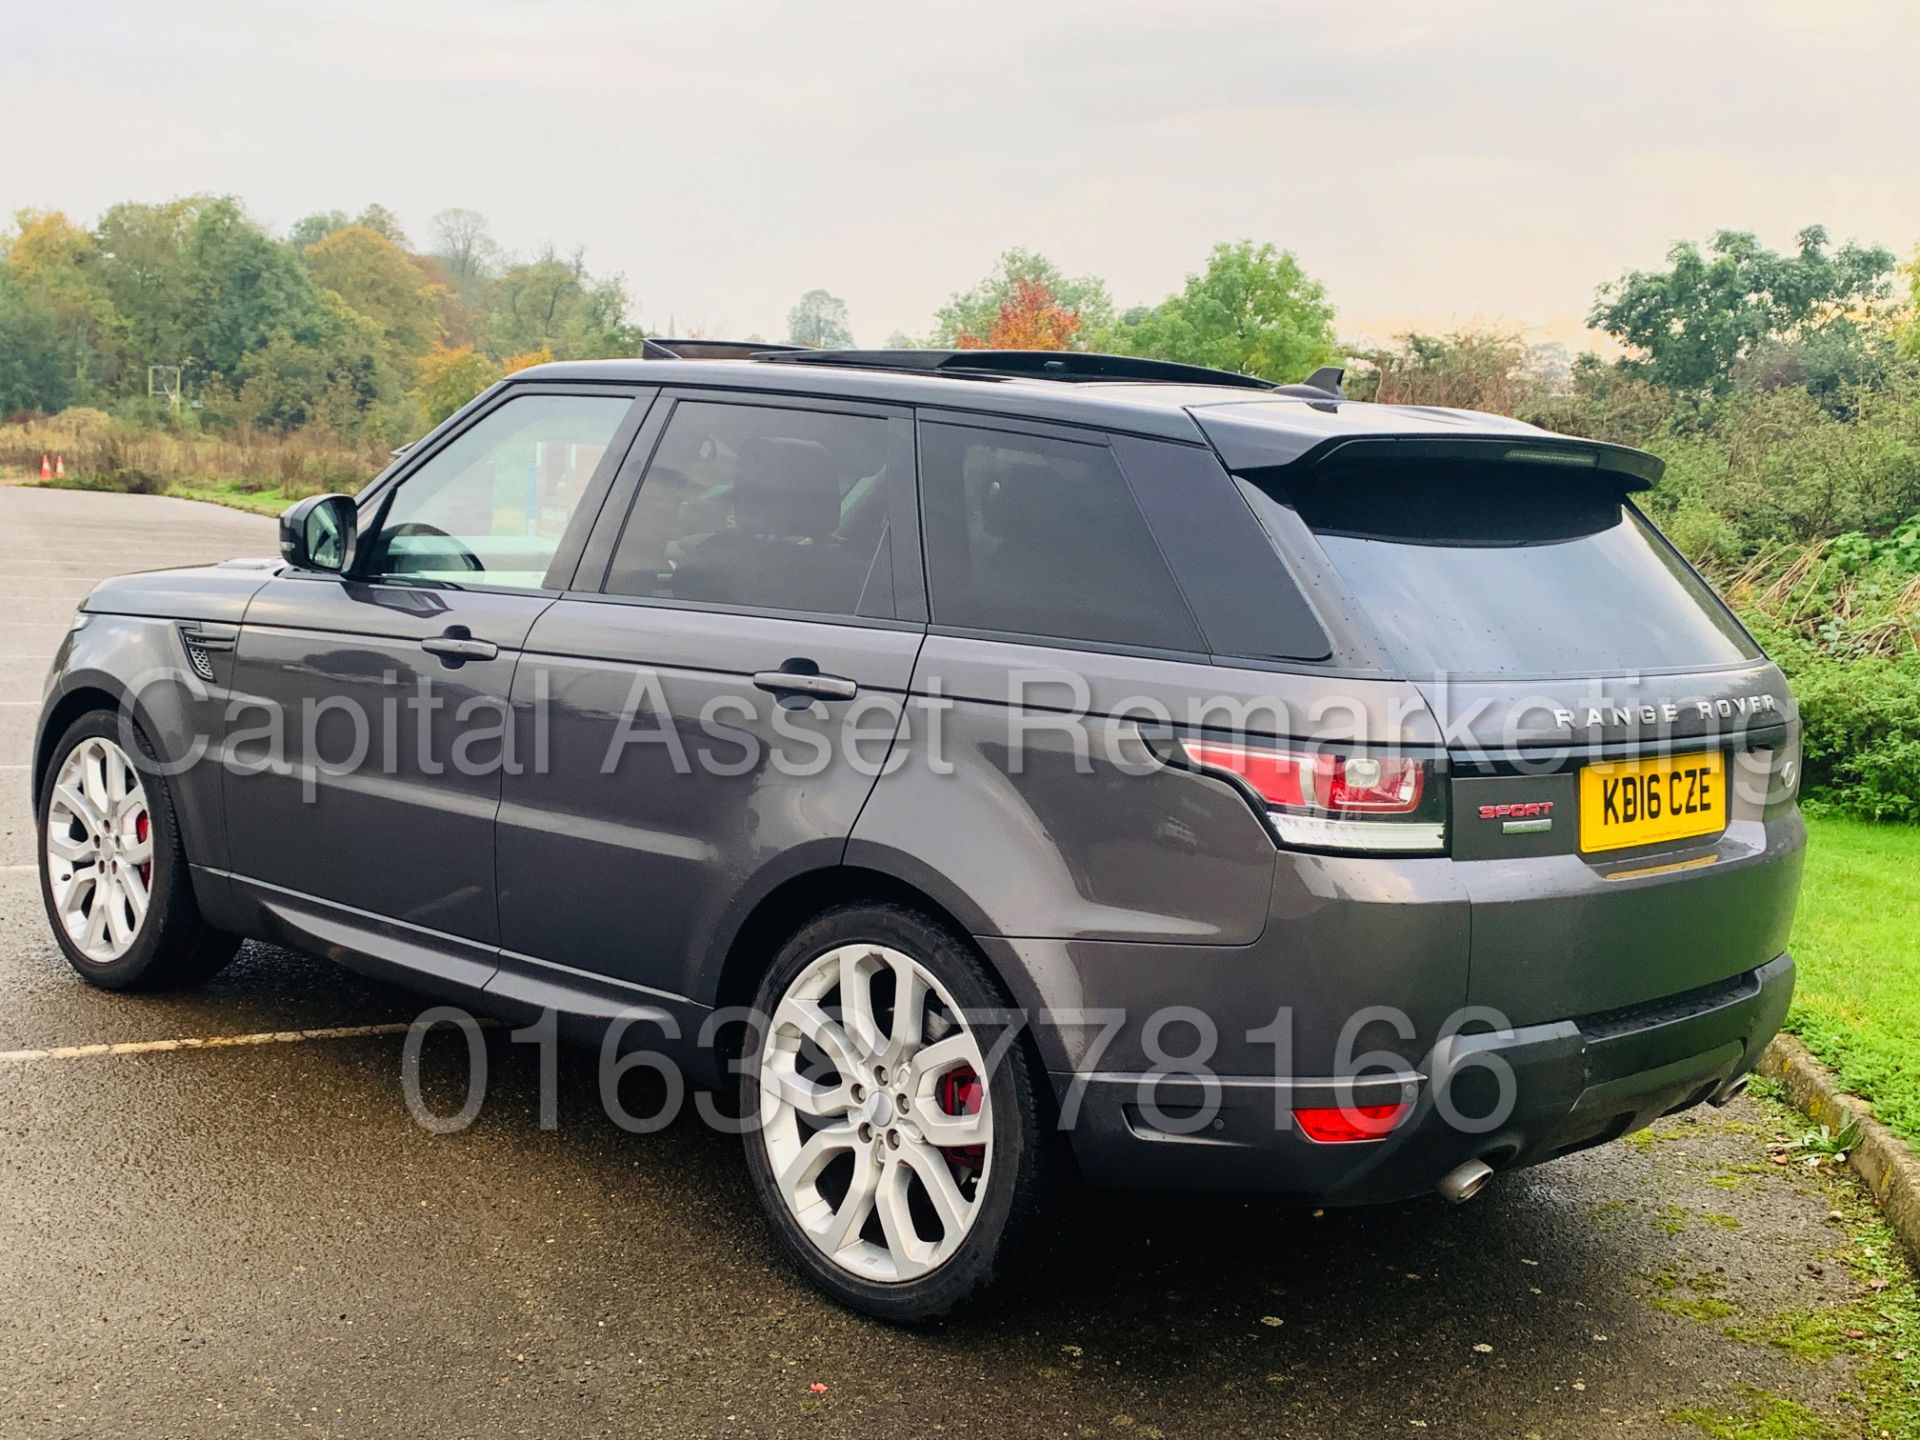 (ON SALE) RANGE ROVER SPORT 3.0 SDV6 *AUTOBIOGRAPHY DYNAMIC*AUTO *FULLY LOADED* MONSTER SPEC *16 REG - Image 4 of 70